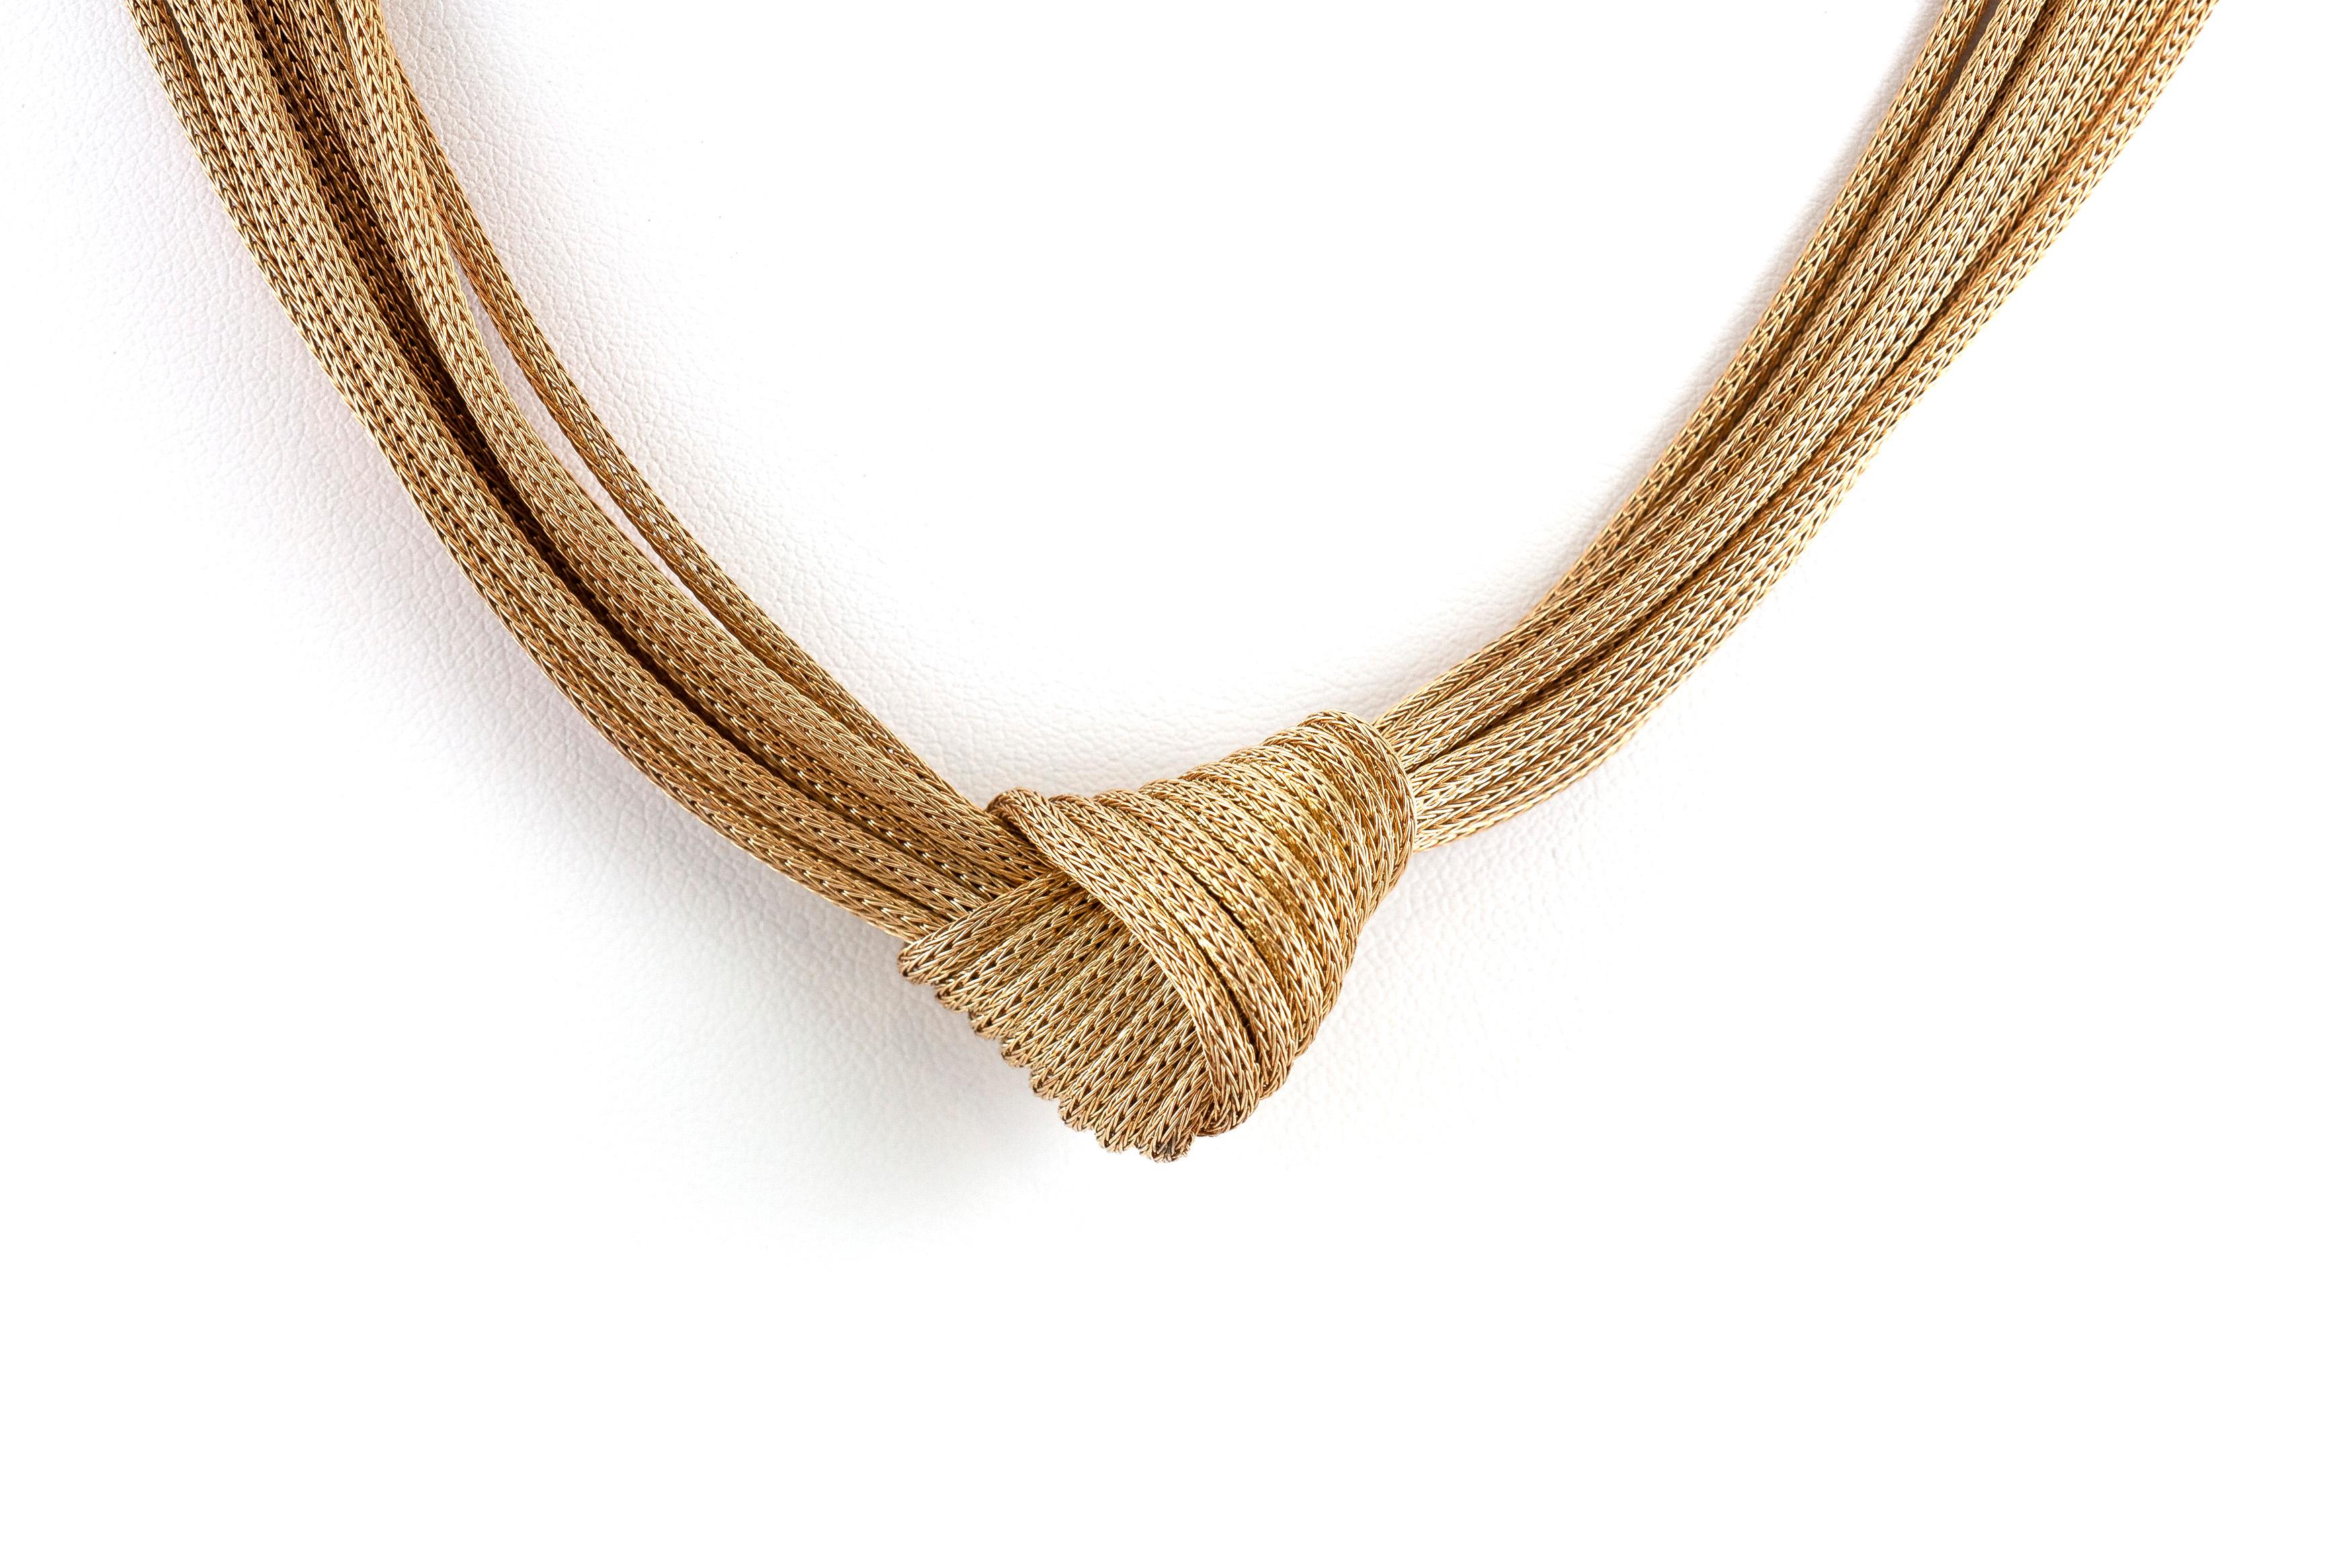 The Necklace is finely crafted in 14k yellow gold and weighing approximately total of 31.5 dwt.